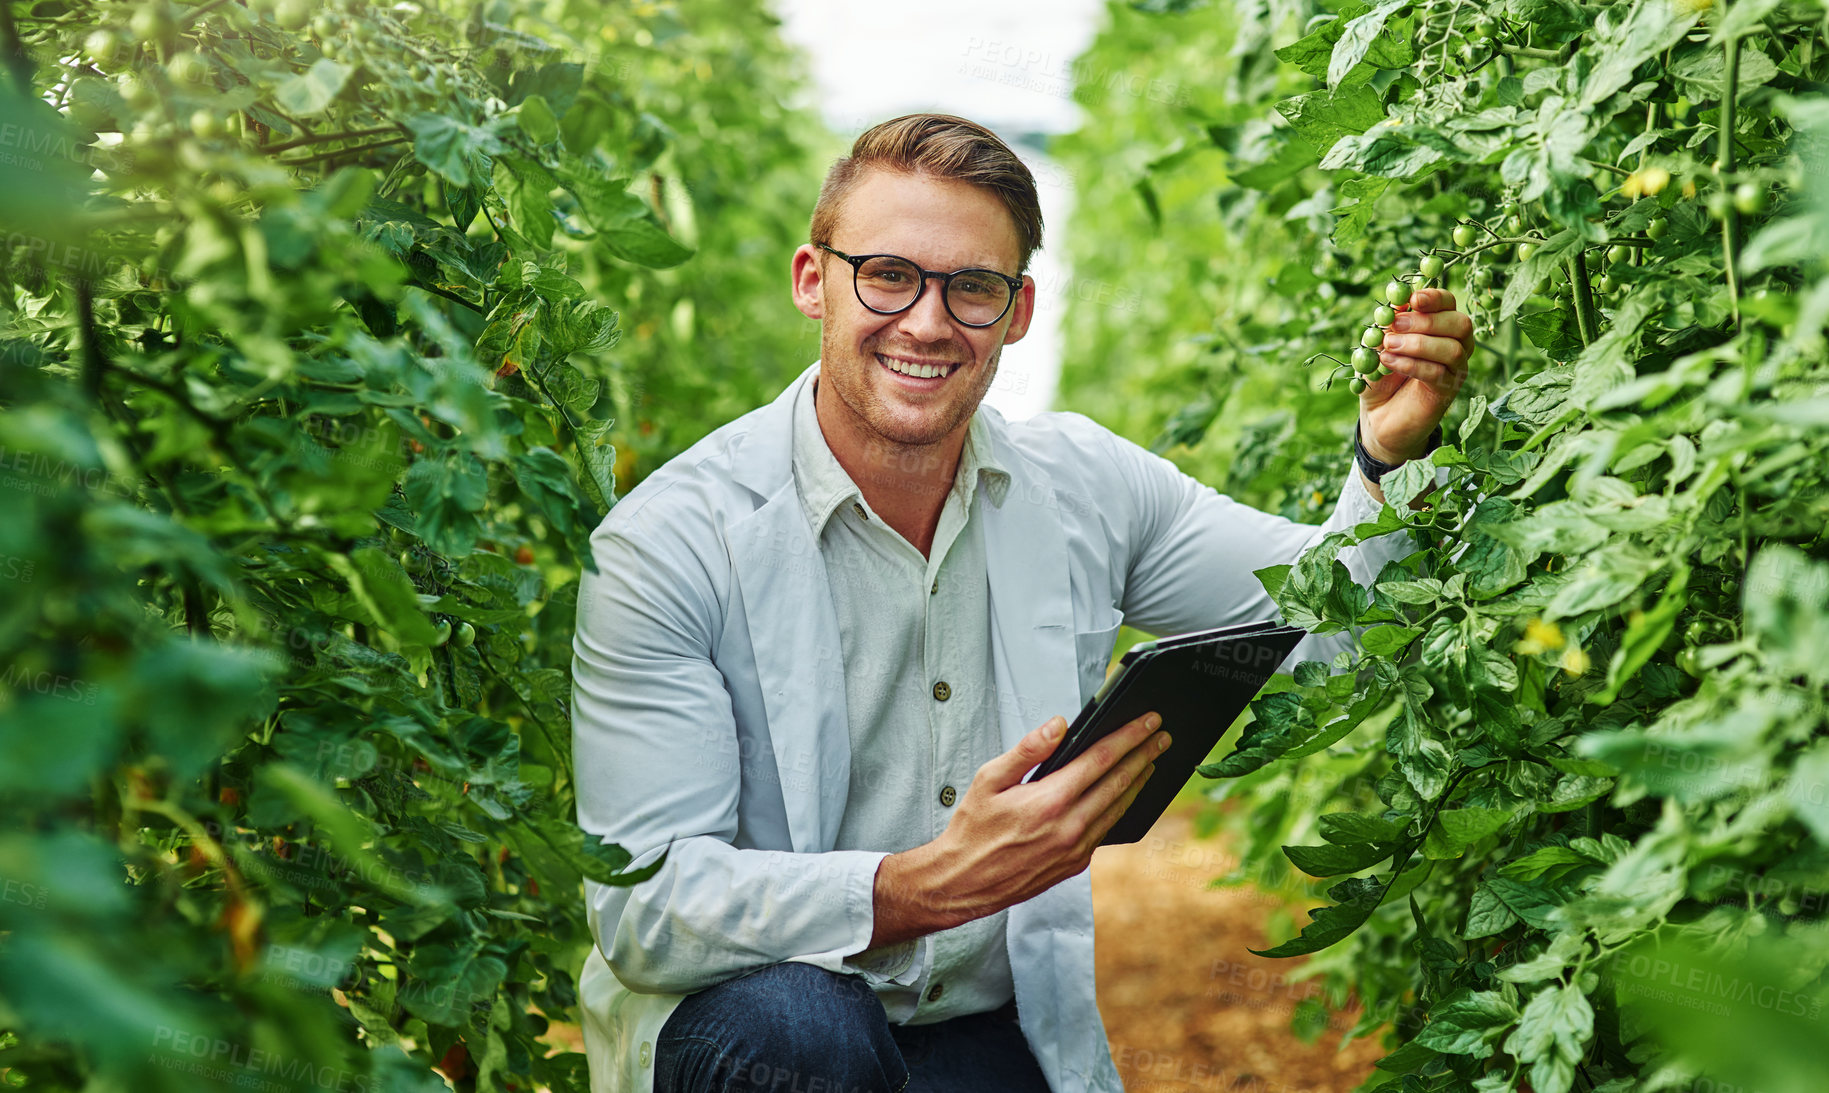 Buy stock photo Portrait of a handsome young scientist using a digital tablet while studying plants and crops outdoors on a farm